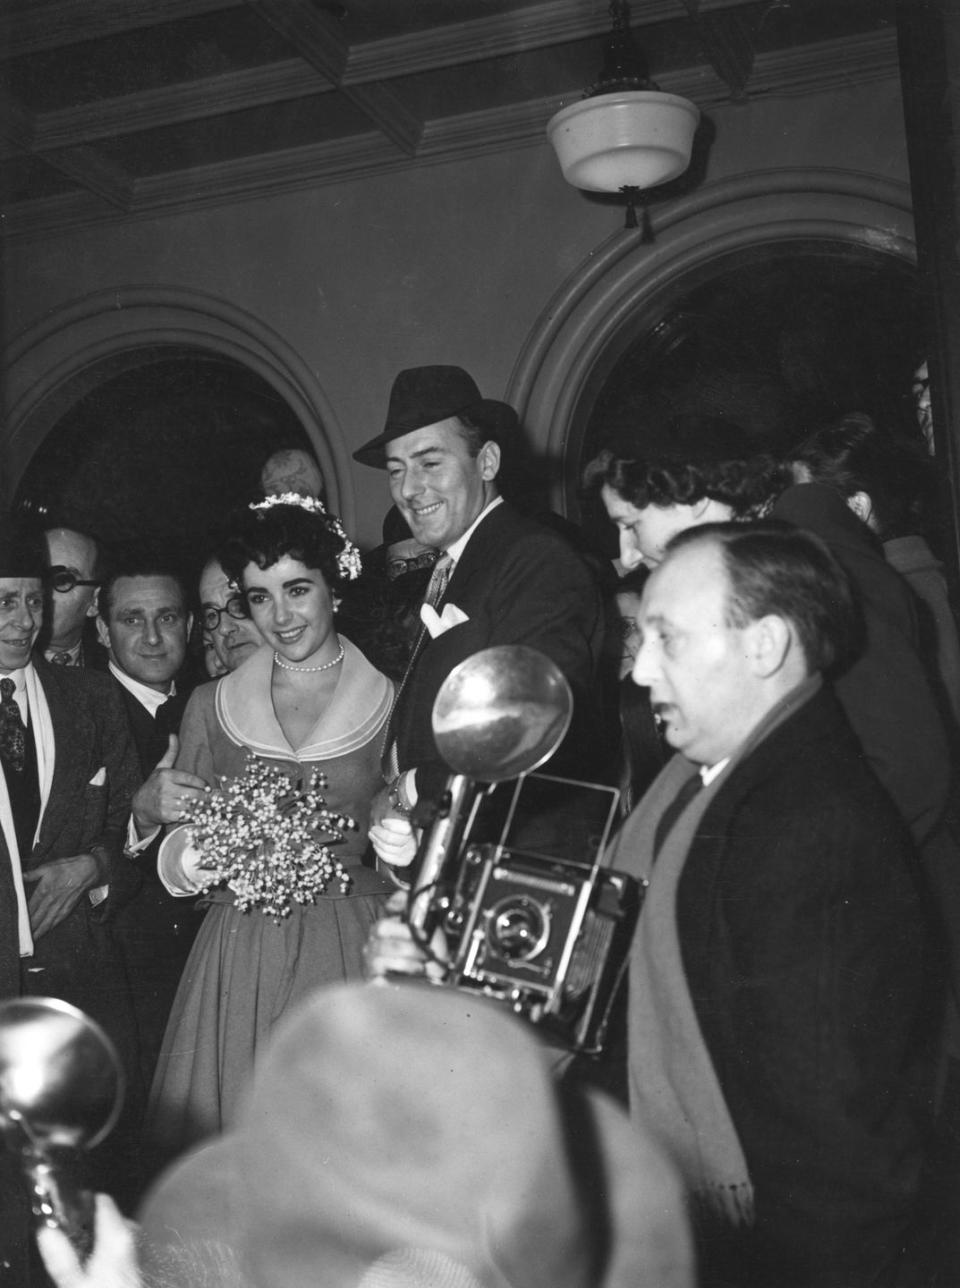 <p>Elizabeth Taylor's second wedding was less grand than her first. Wearing a simple belted dress and flowers in her chignon, Elizabeth and Michael Wilding got married at Caxton Hall in London. </p>